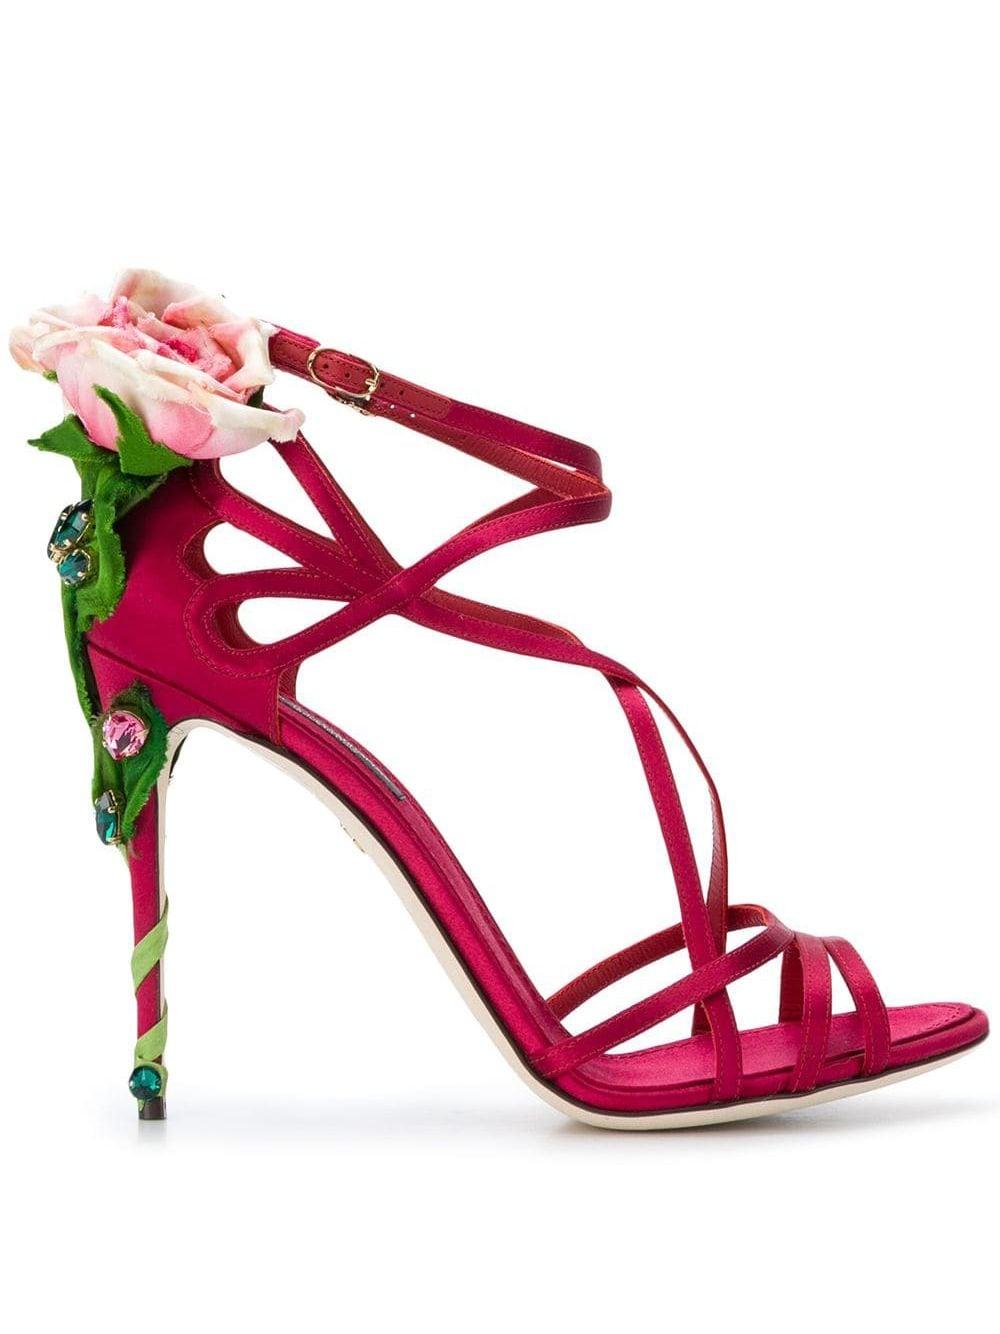 Dolce & Gabbana Keira Rose Jewelled Sandals in Red | Lyst